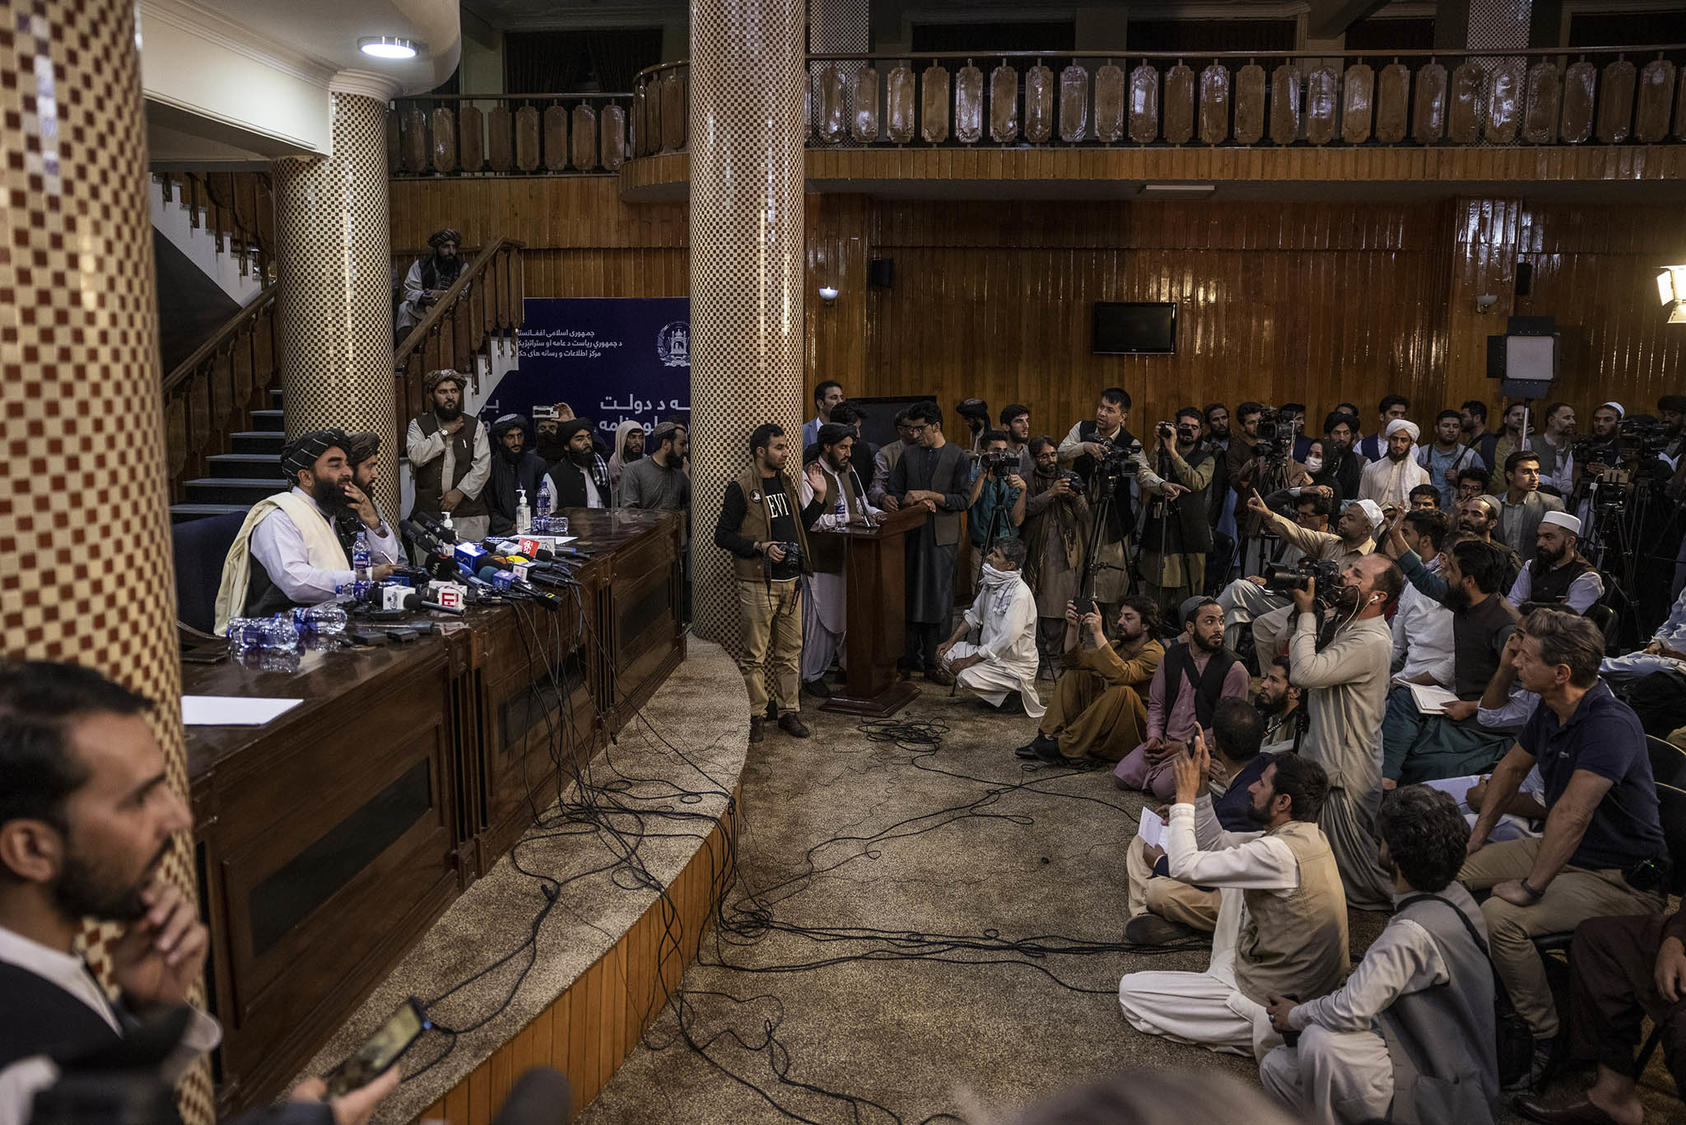 A Taliban spokesman addresses reporters in Kabul, Afghanistan, Aug. 17, 2021. The group’s public messaging capacity has seen a  significant jump since they appropriated the former government’s state media apparatus. (Jim Huylebroek/The New York Times)